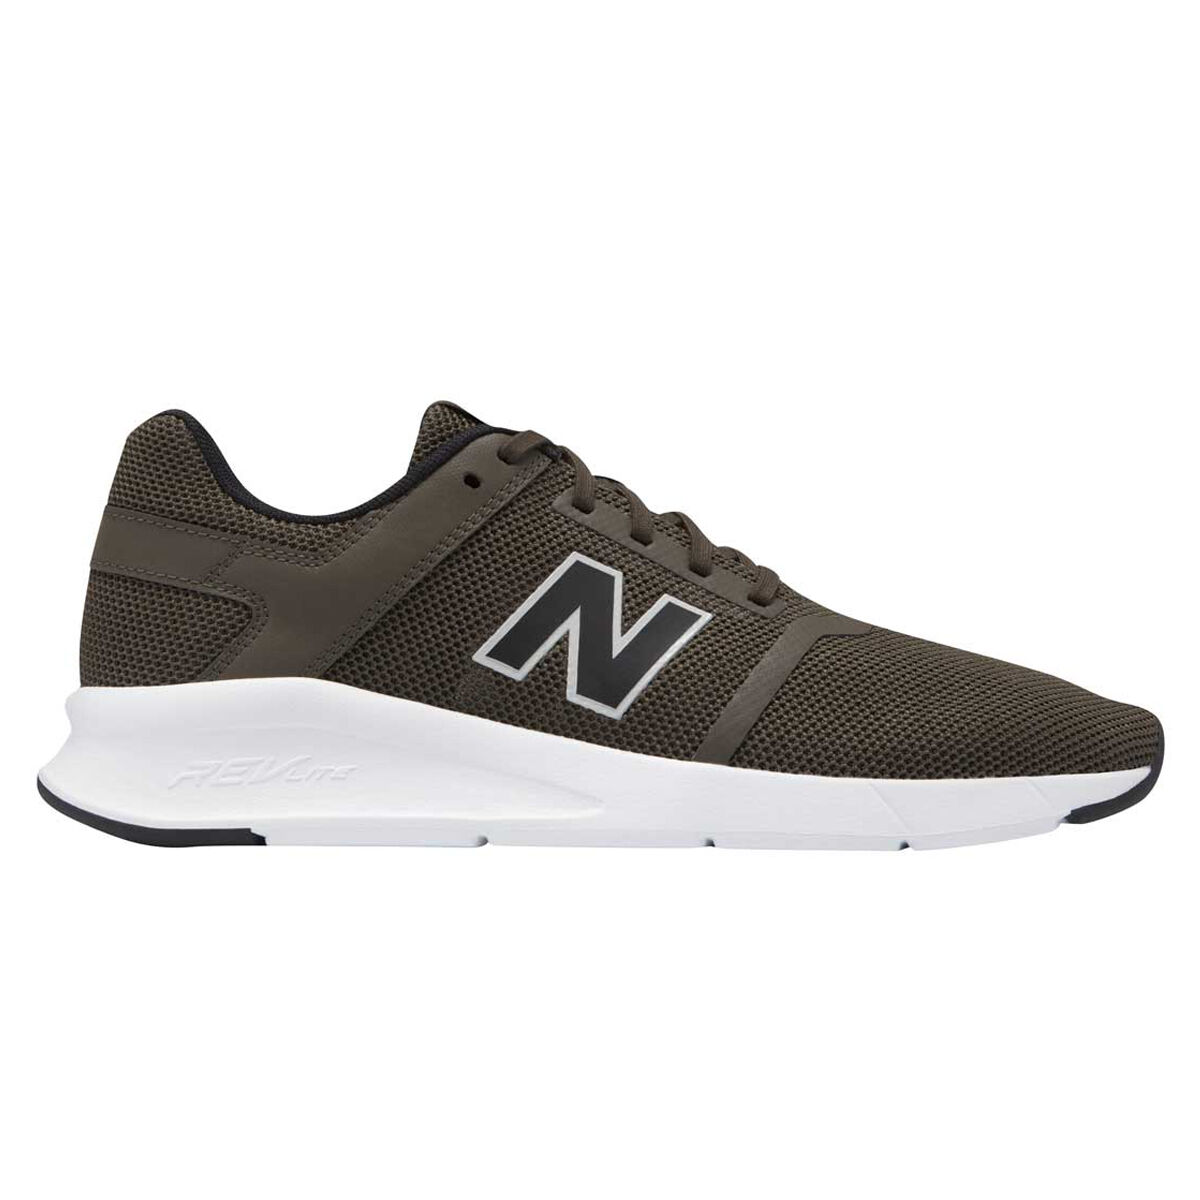 new balance casual shoes for men